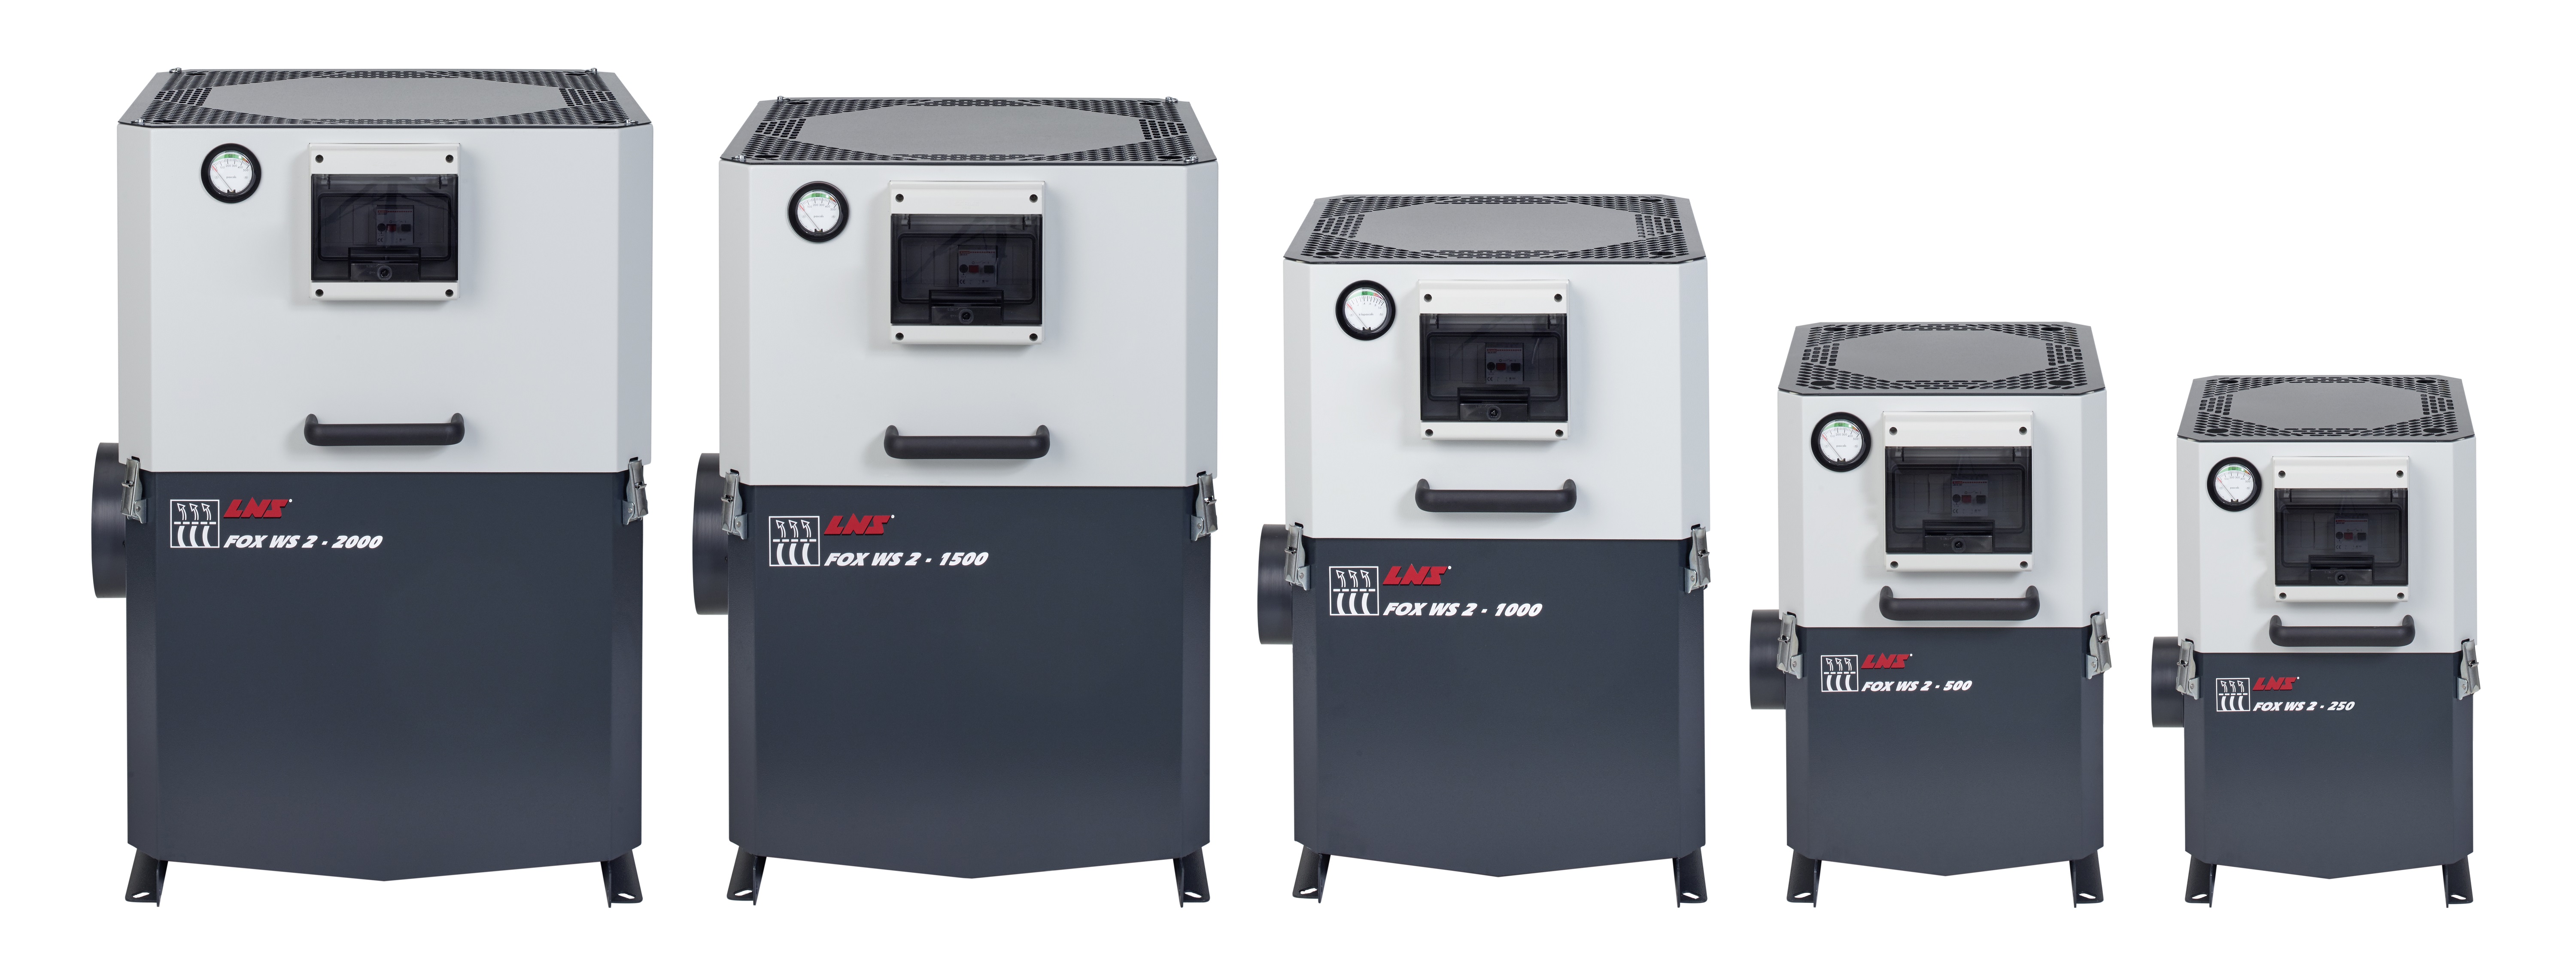 The FOX WS 2 air filtration range promises efficient filtration, ease of maintenance and low energy consumption.